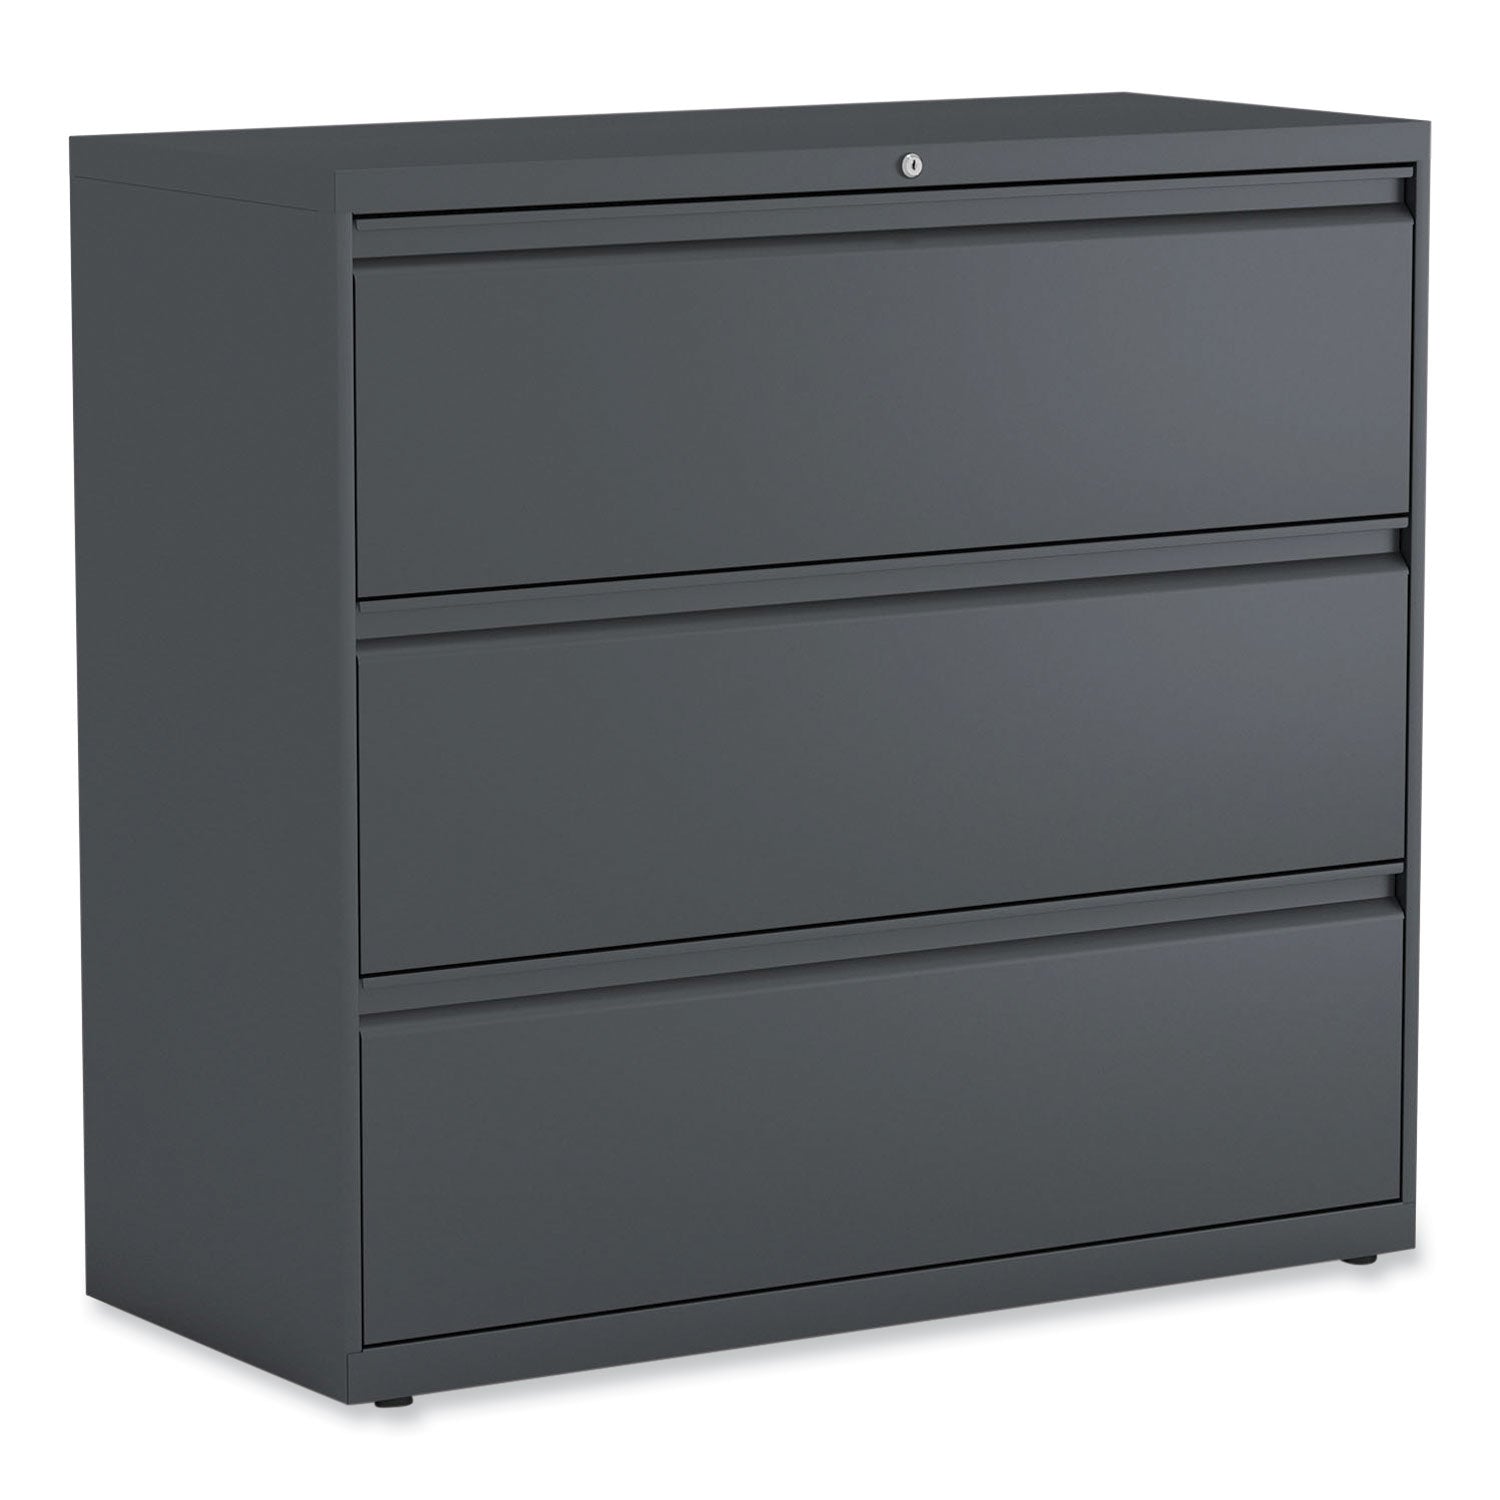 lateral-file-3-legal-letter-a4-a5-size-file-drawers-charcoal-42-x-1863-x-4025_alehlf4241cc - 1